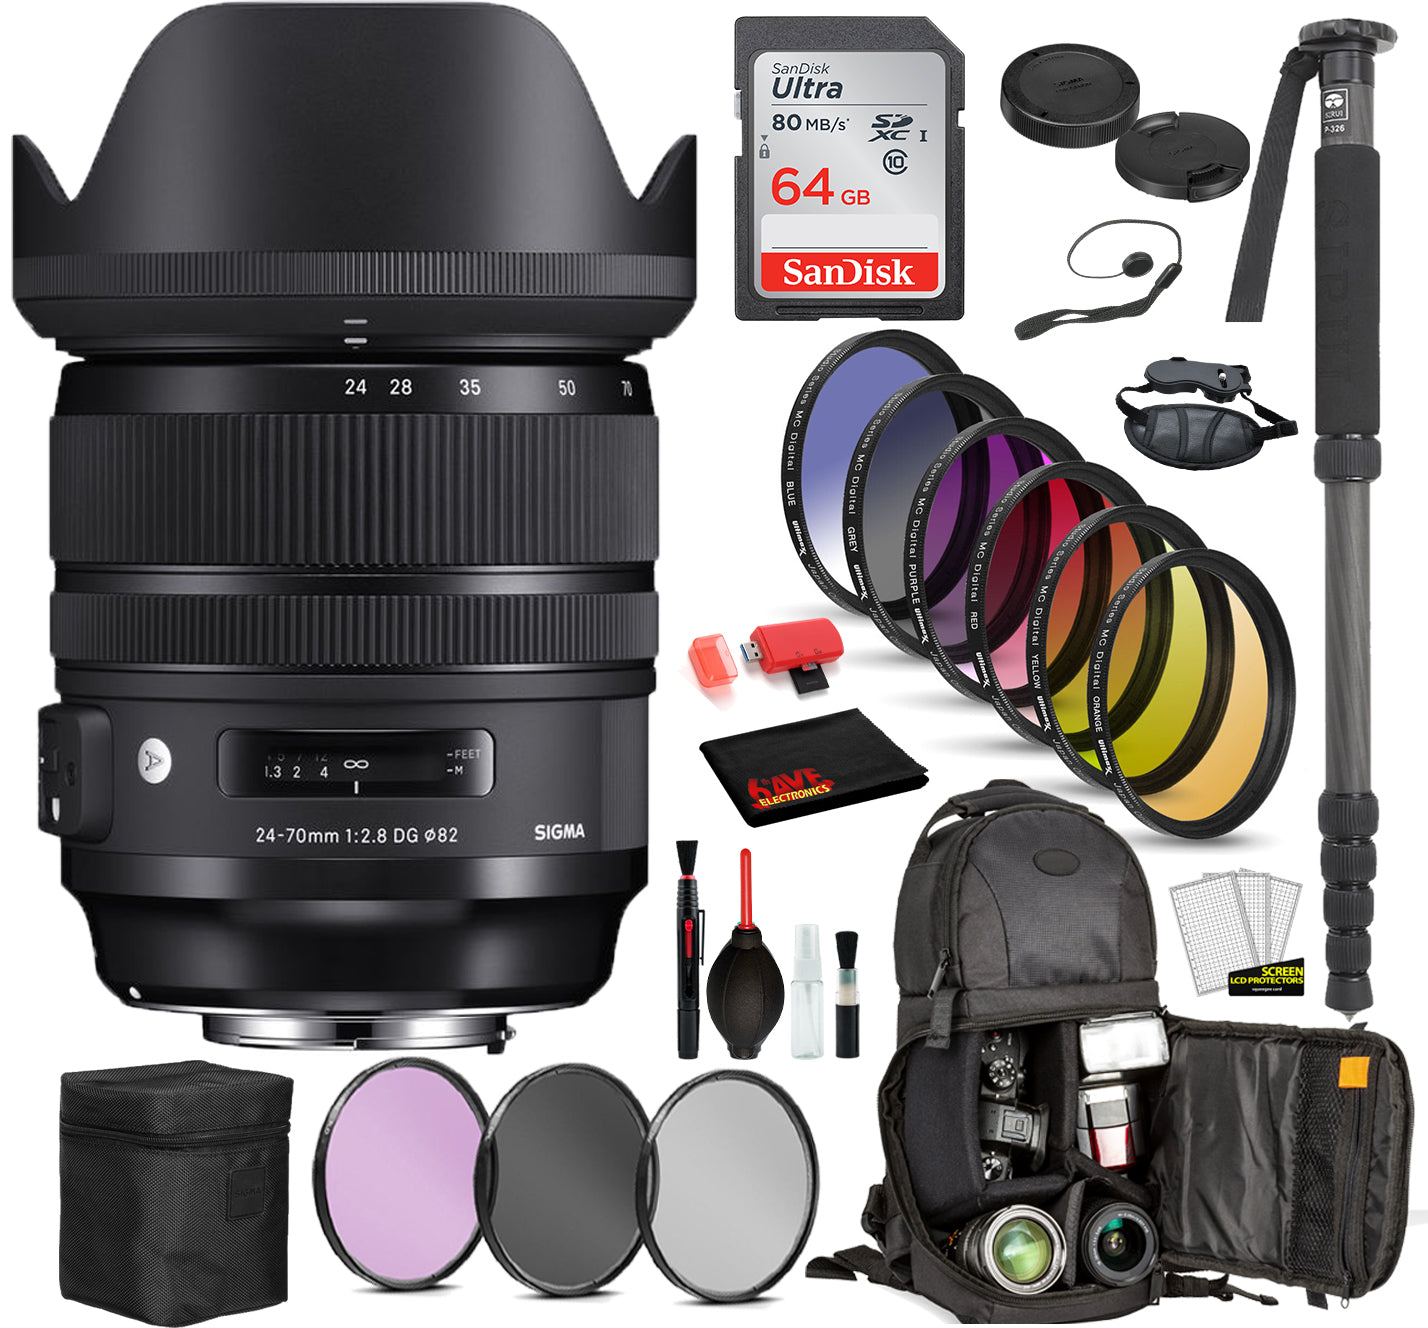 Sigma 24-70mm f/2.8 DG OS HSM Art Lens for Canon EF with Bundle Includes: Sandisk 64gb SD Card, 9PC Filter Kit + More